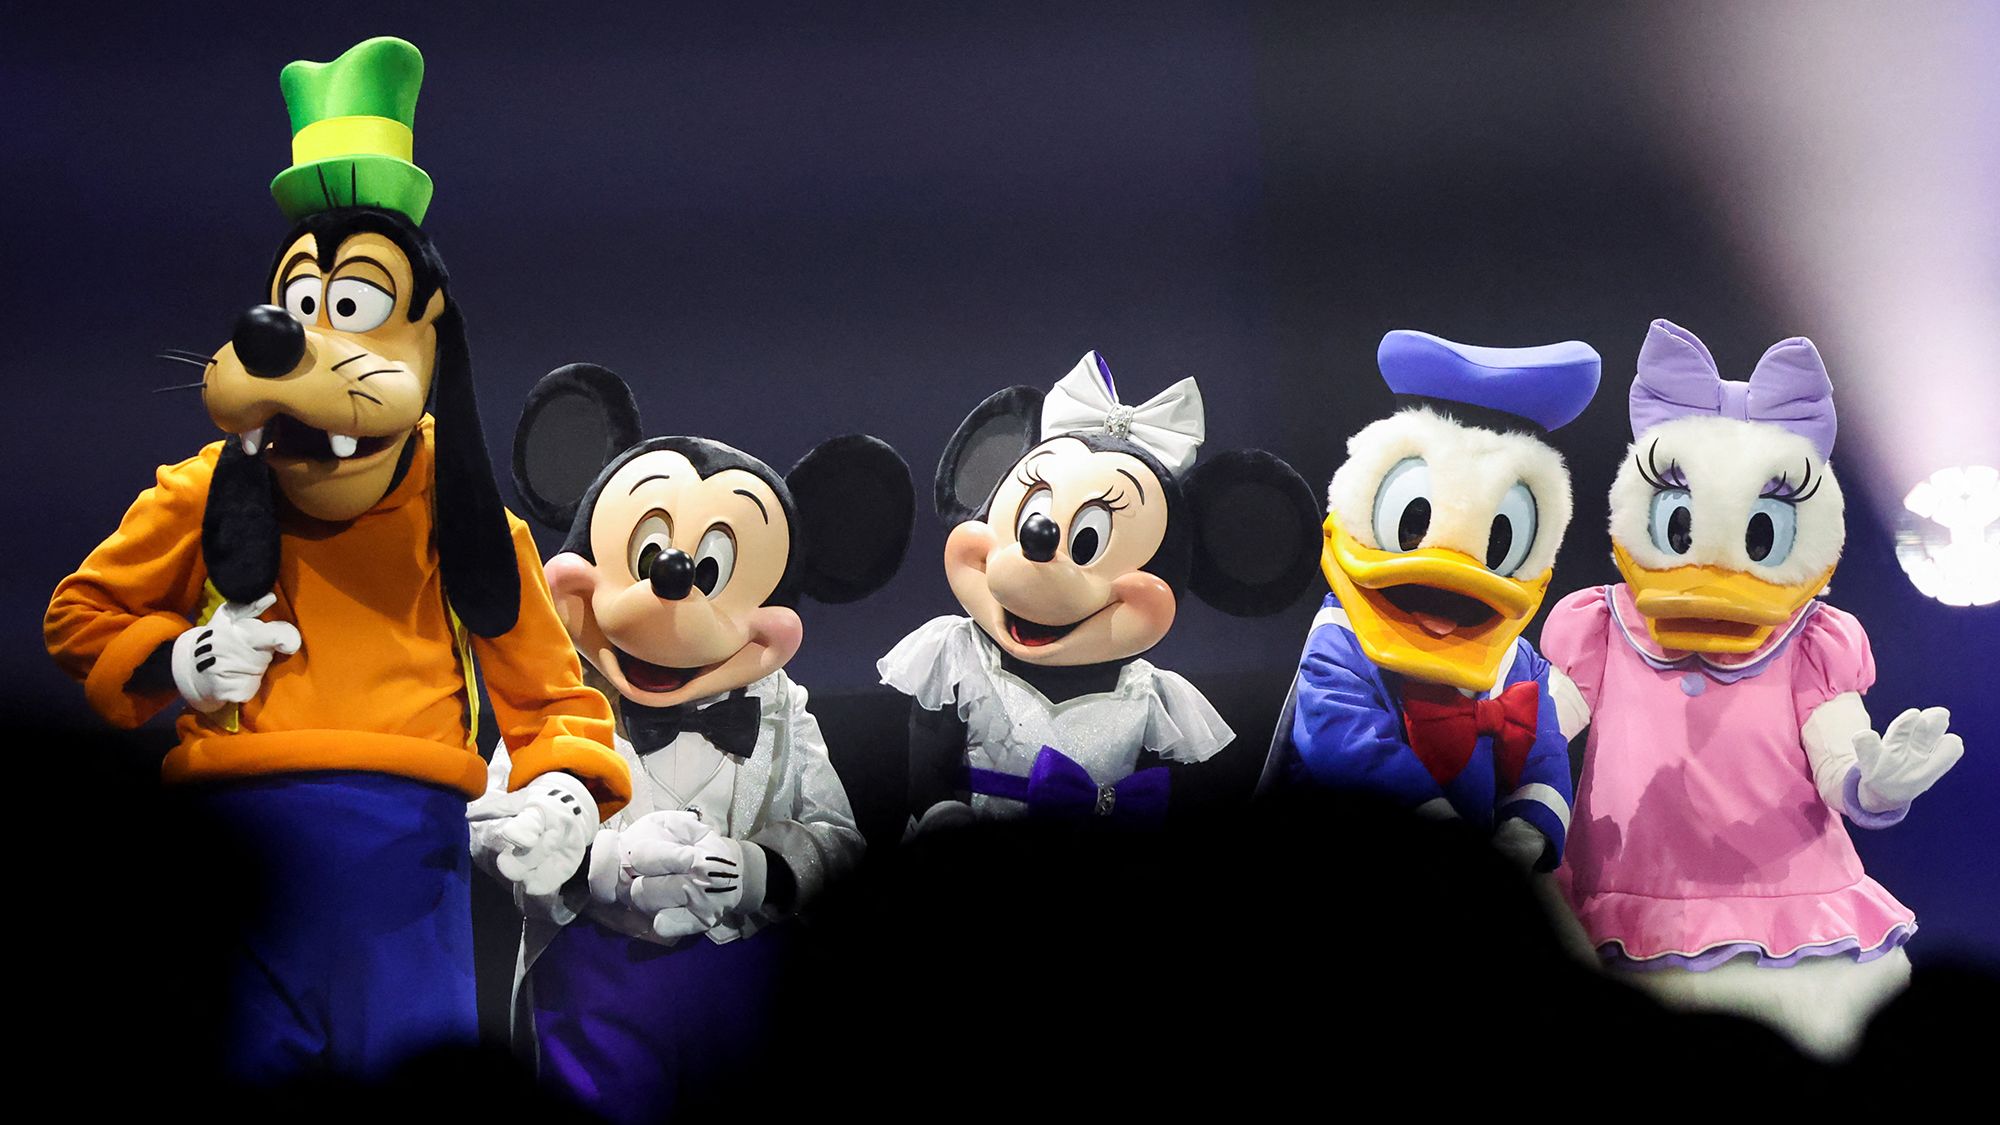 Disneyland's Mickey, Minnie, Donald and Goofy want to join a union